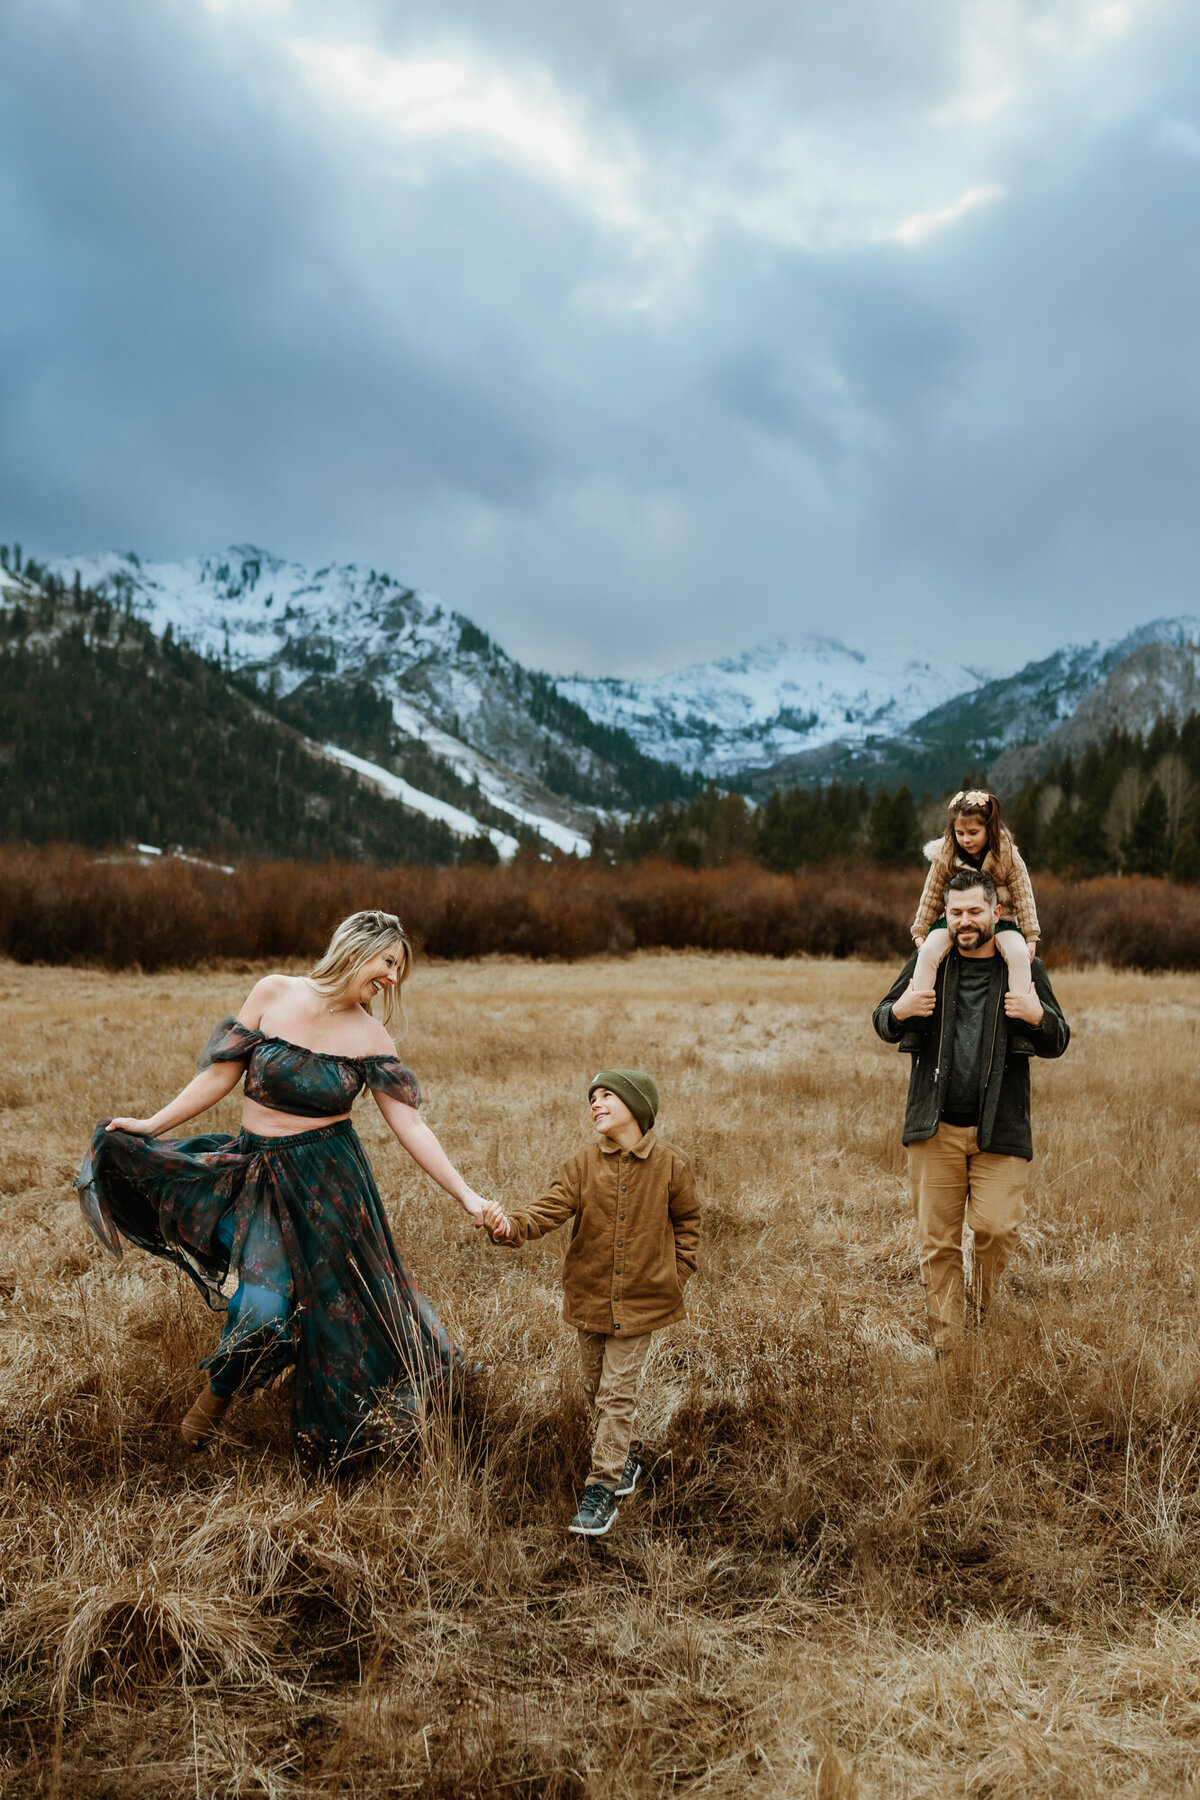 Mom is holding her son's hands looking at him and laughing as the dad walks behind them with their daughter on his shoulders in a field with mountains